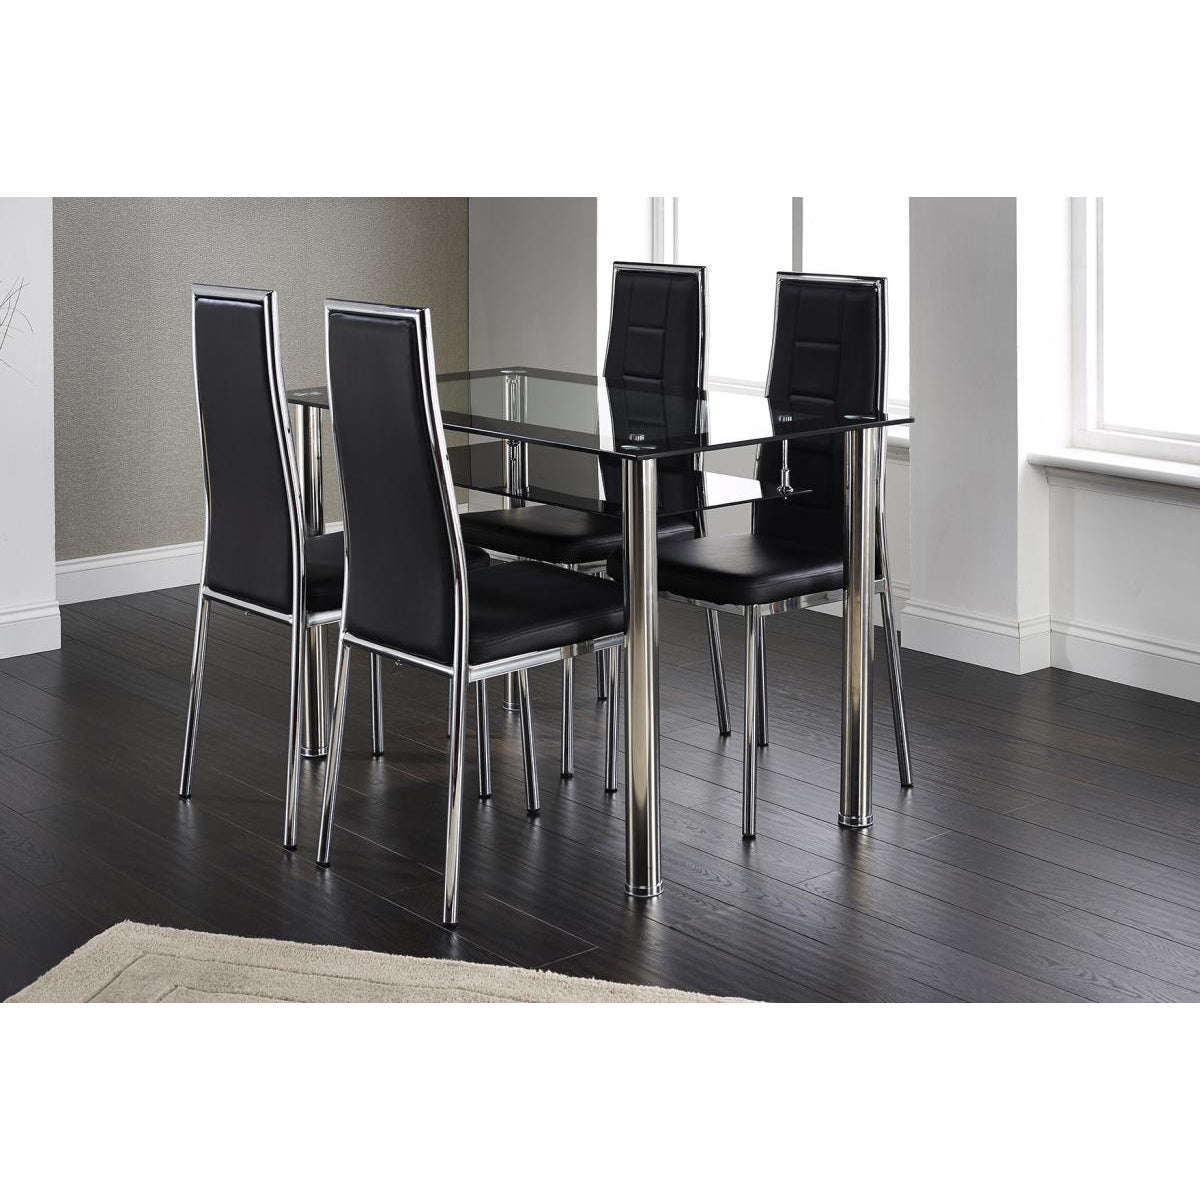 Ashpinoke:Andora Dining Set with 4 Chairs Chrome & Black,Dining Sets,Heartlands Furniture